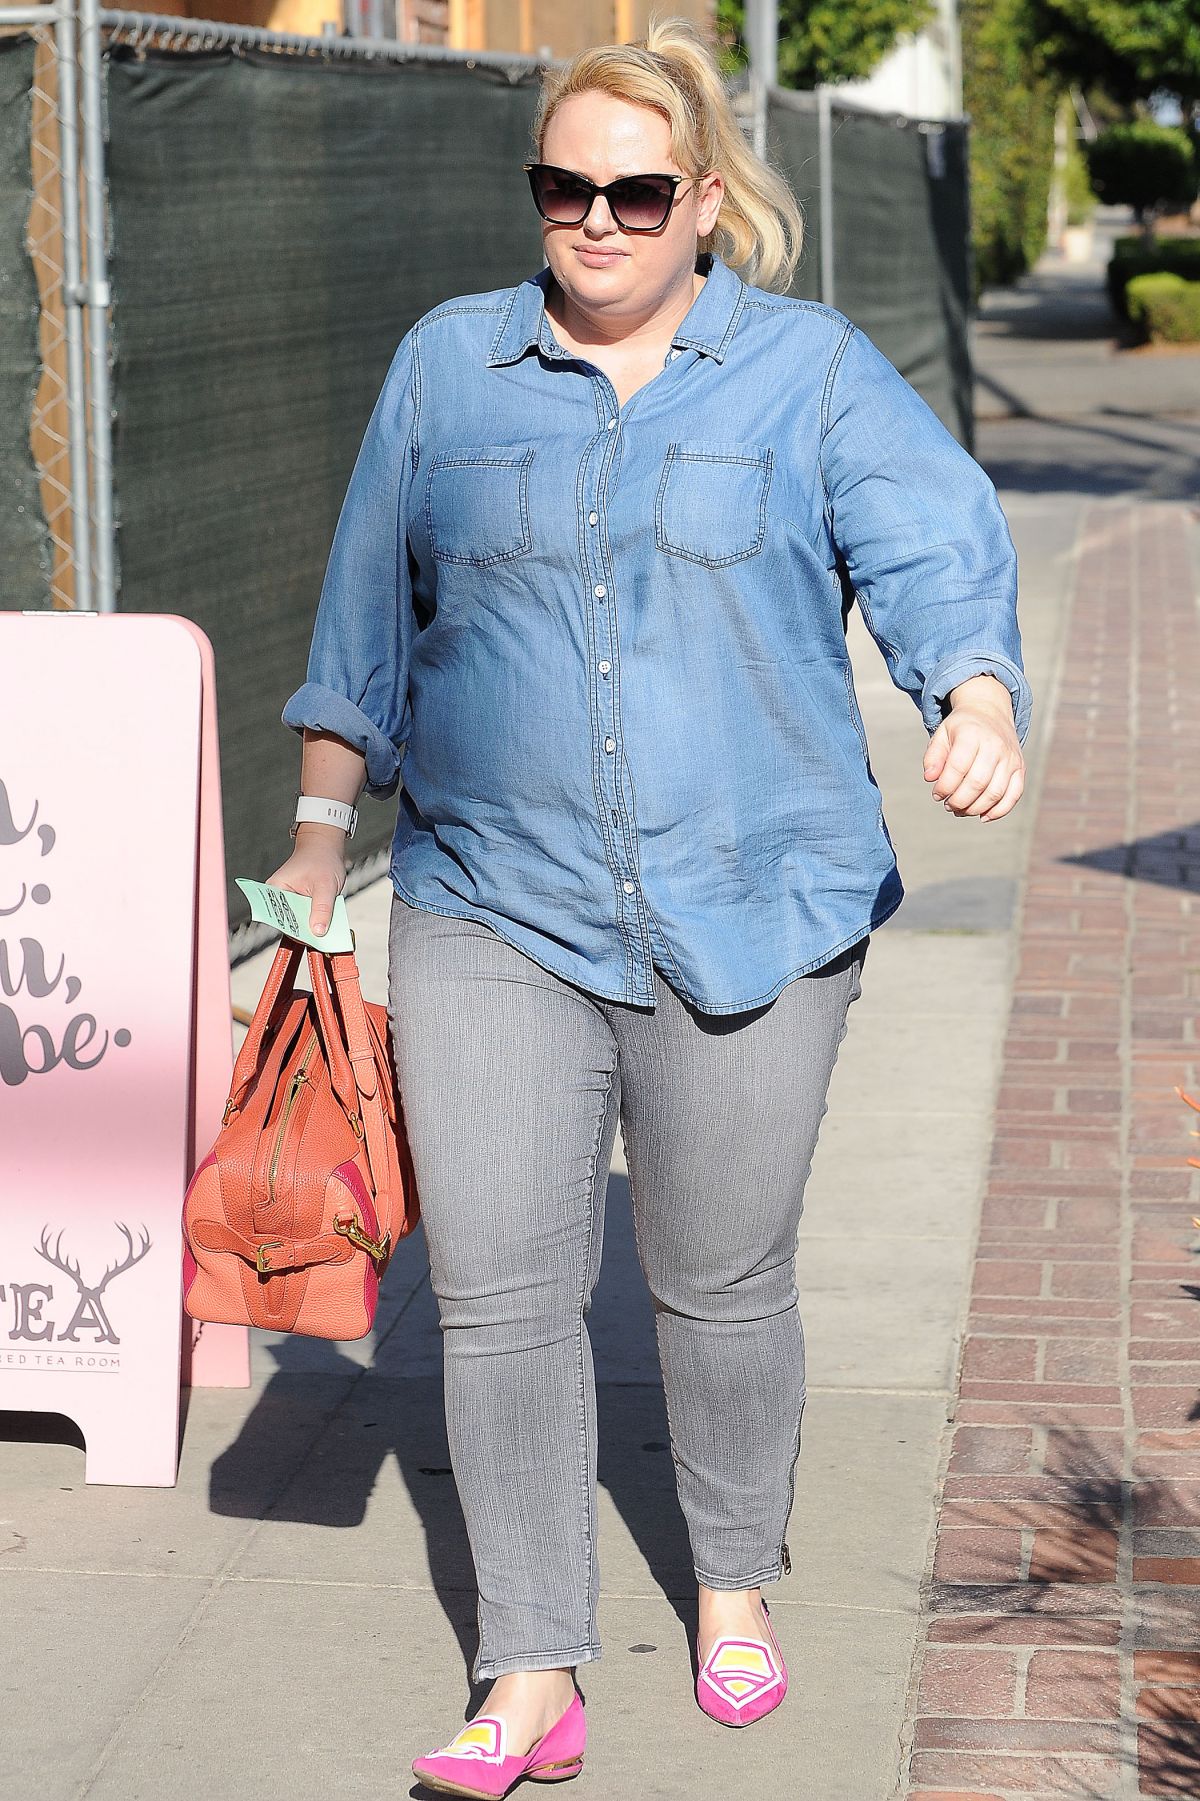 REBEL WILSON Out and About in Beverly Hills 09/06/2016 – HawtCelebs